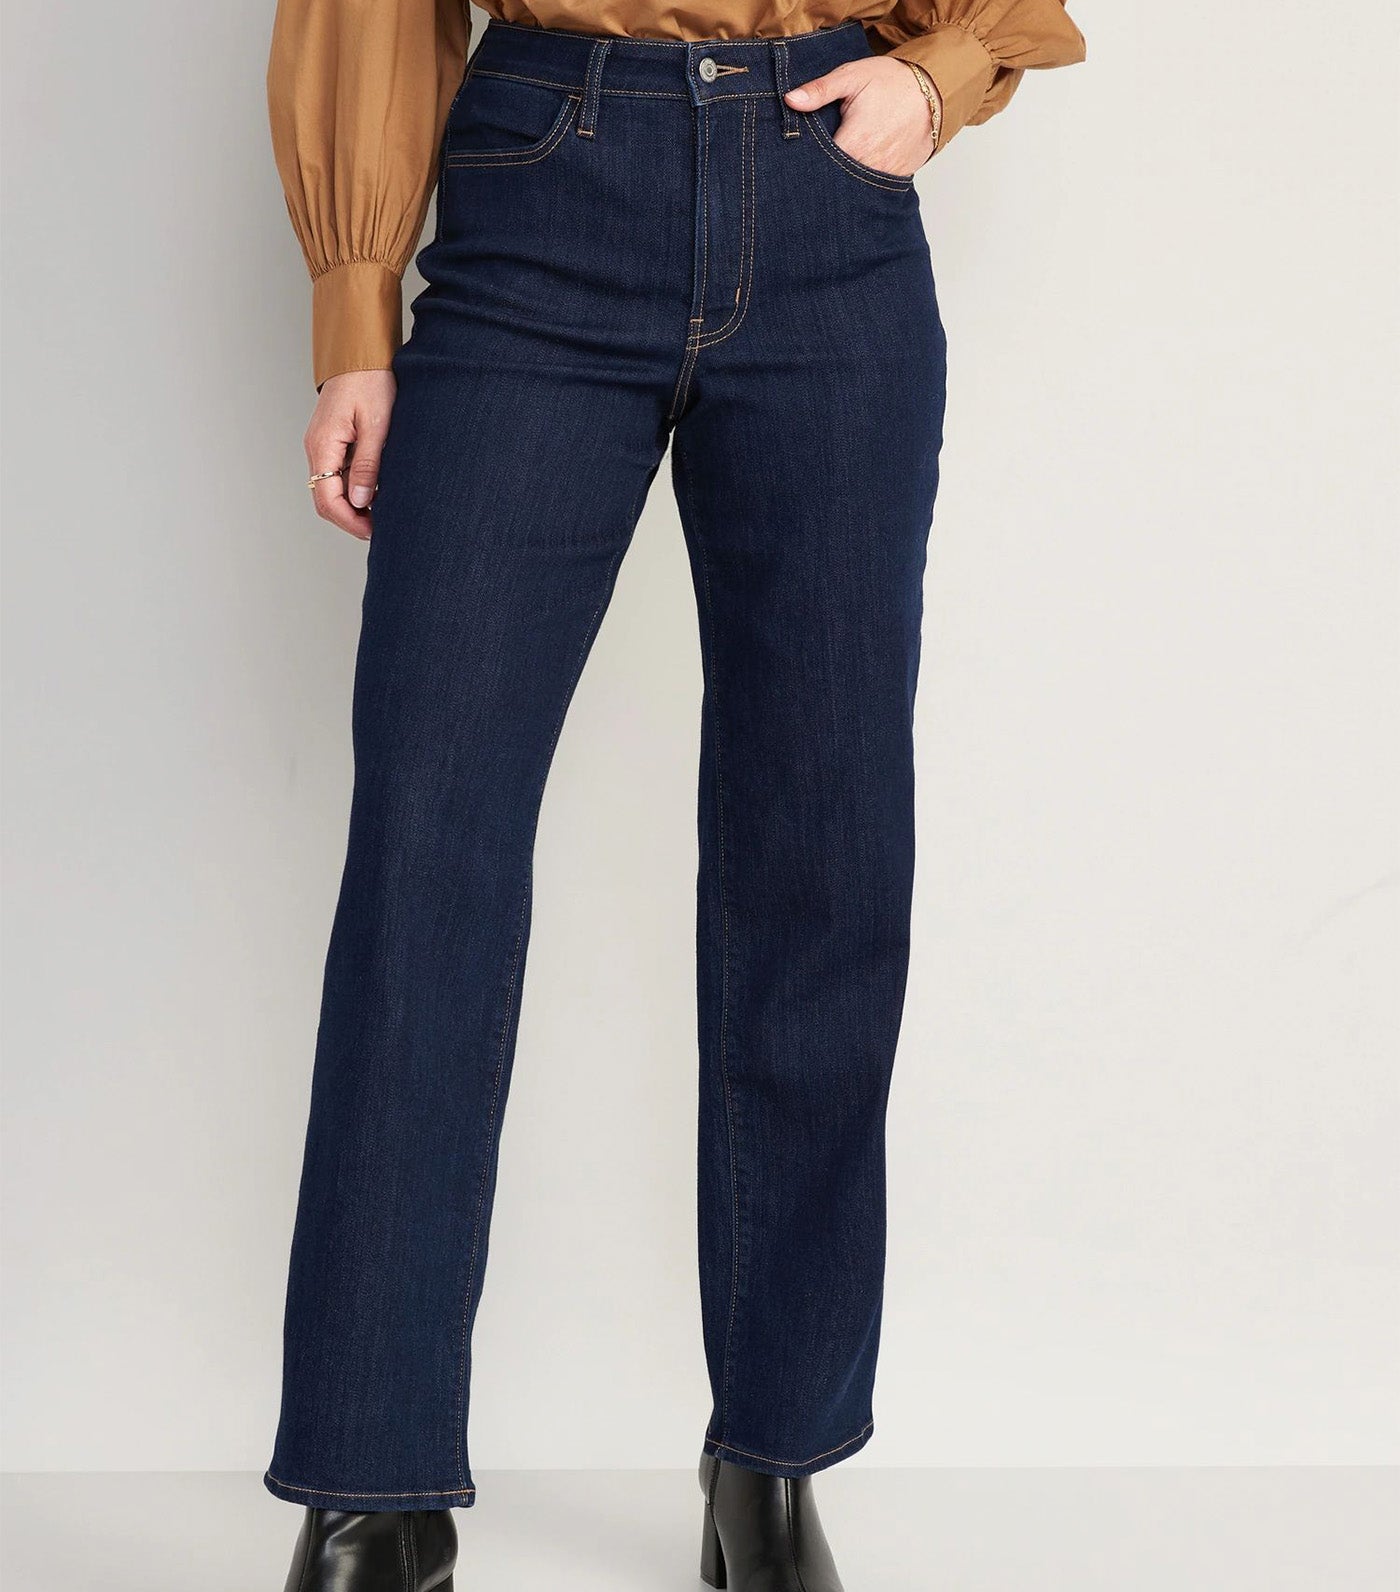 Wow High-Waisted Loose Jeans for Women Dark Rinse